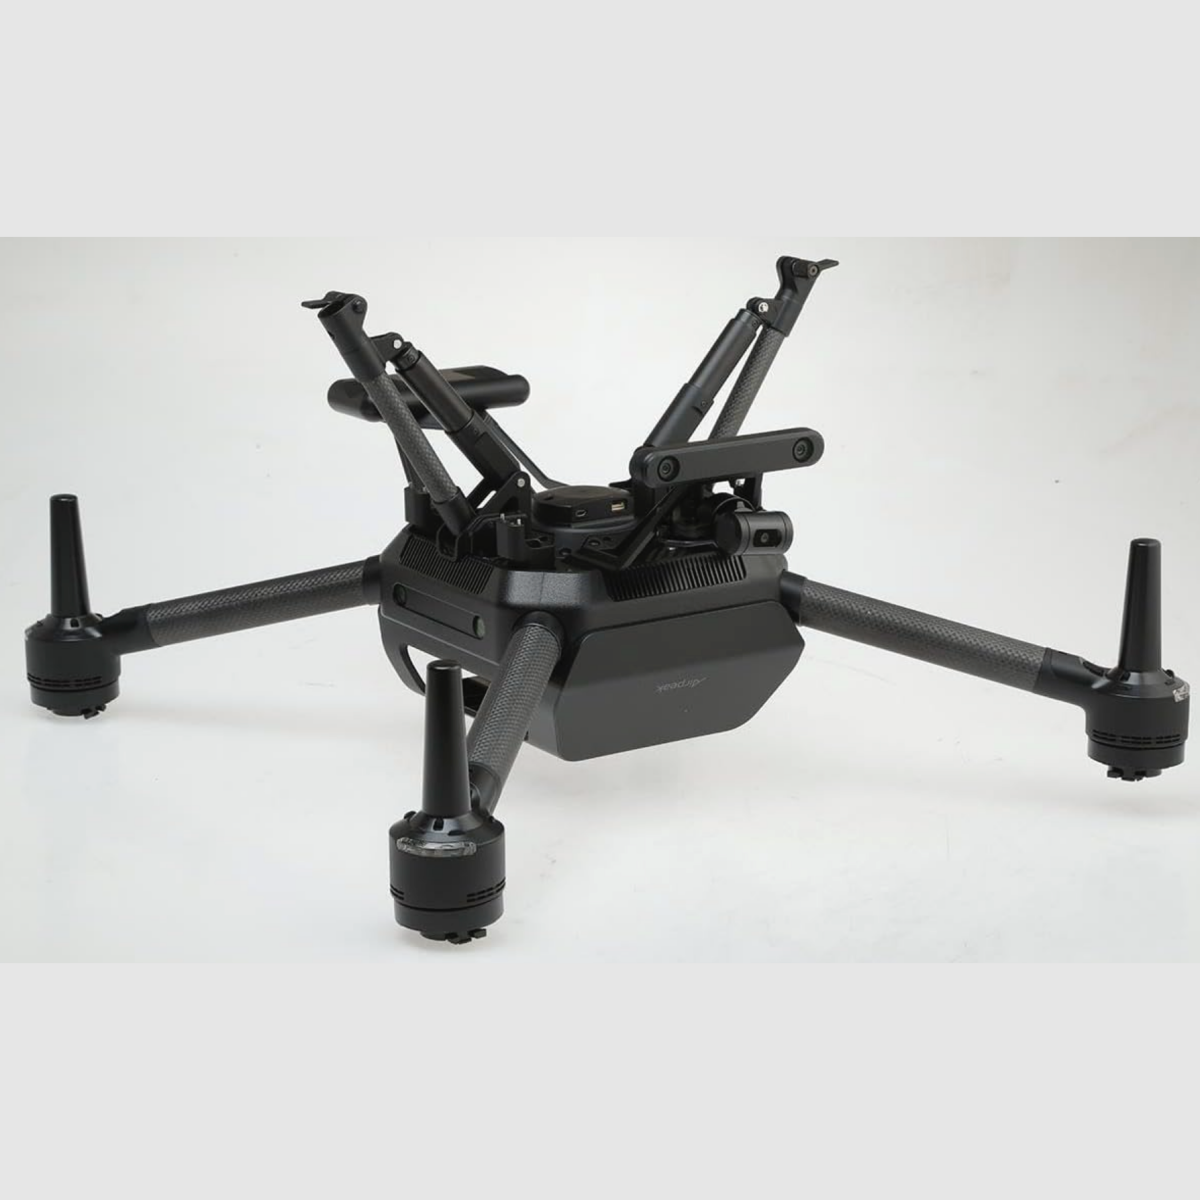 A Sony Airpeak S1 drone